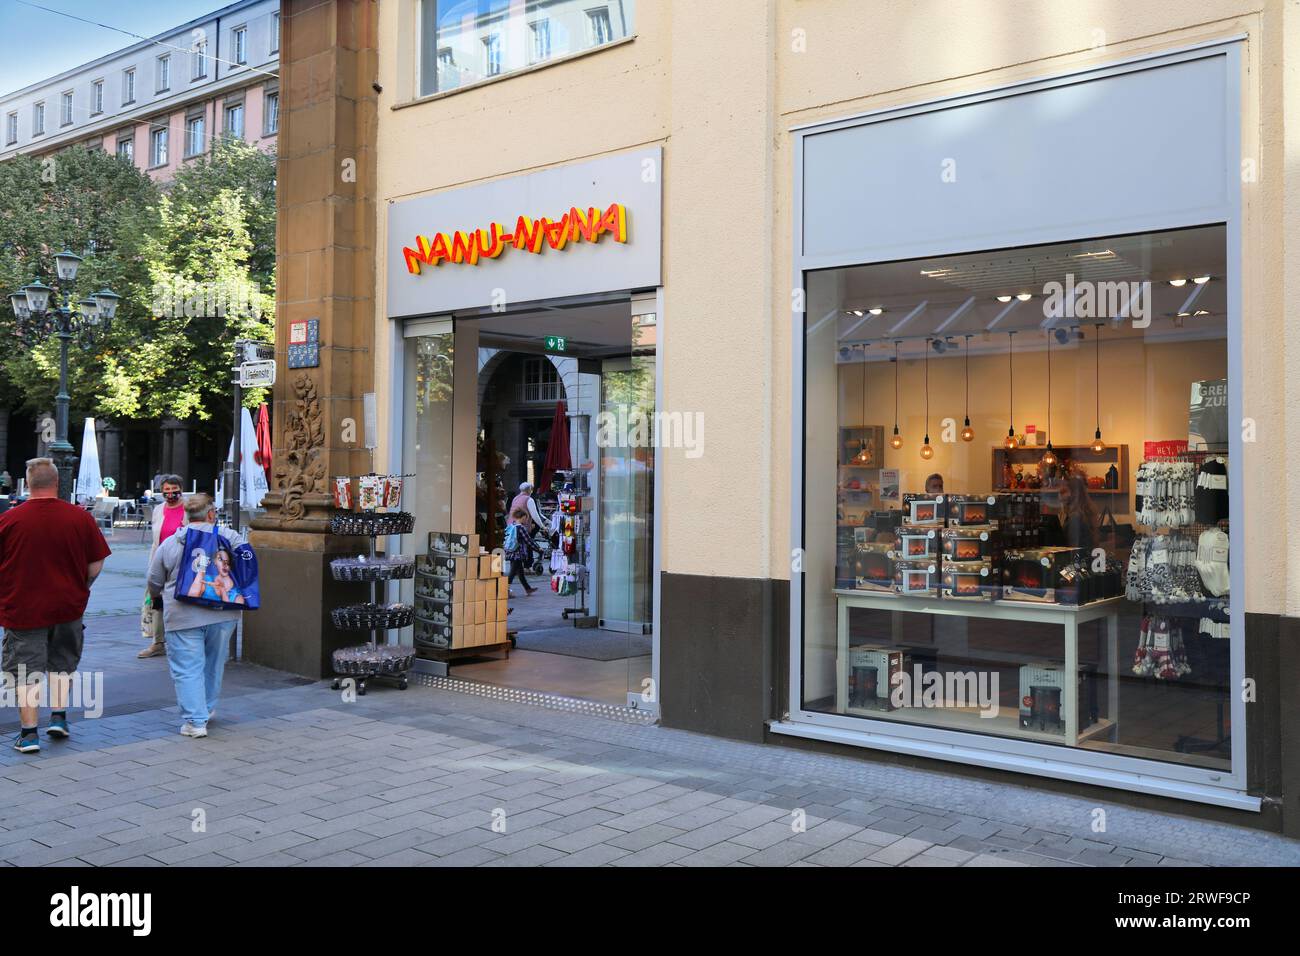 WUPPERTAL, GERMANY - SEPTEMBER 19, 2020: Nanu Nana brand gift shop in Wuppertal, Germany. Nanu Nana is a German retail chain specializing in novelty p Stock Photo